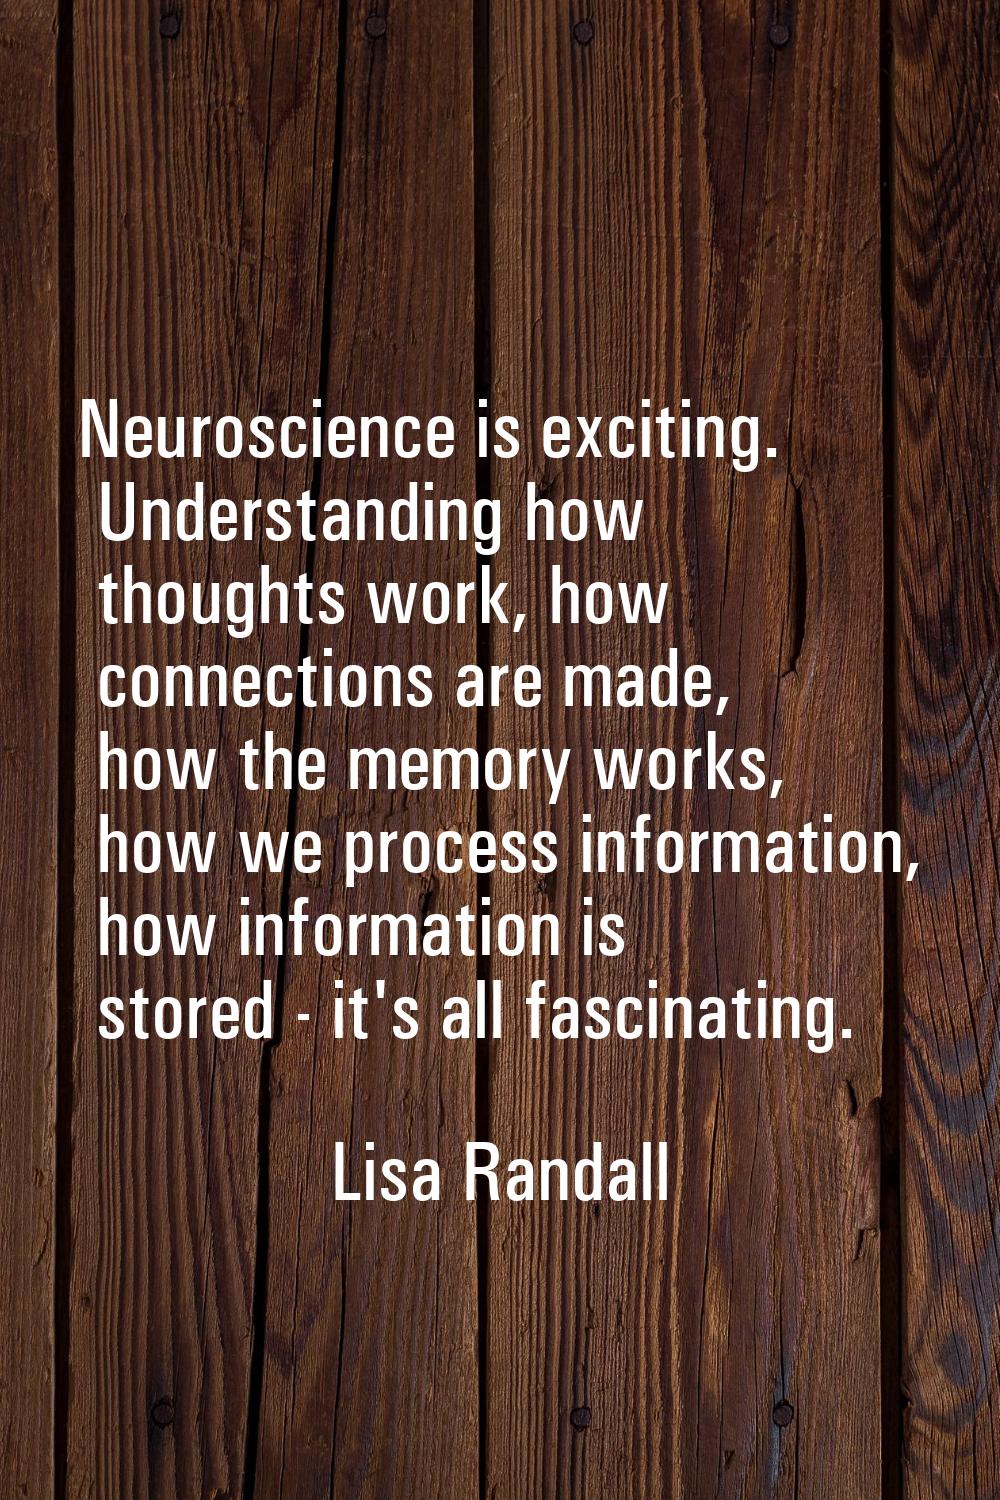 Neuroscience is exciting. Understanding how thoughts work, how connections are made, how the memory